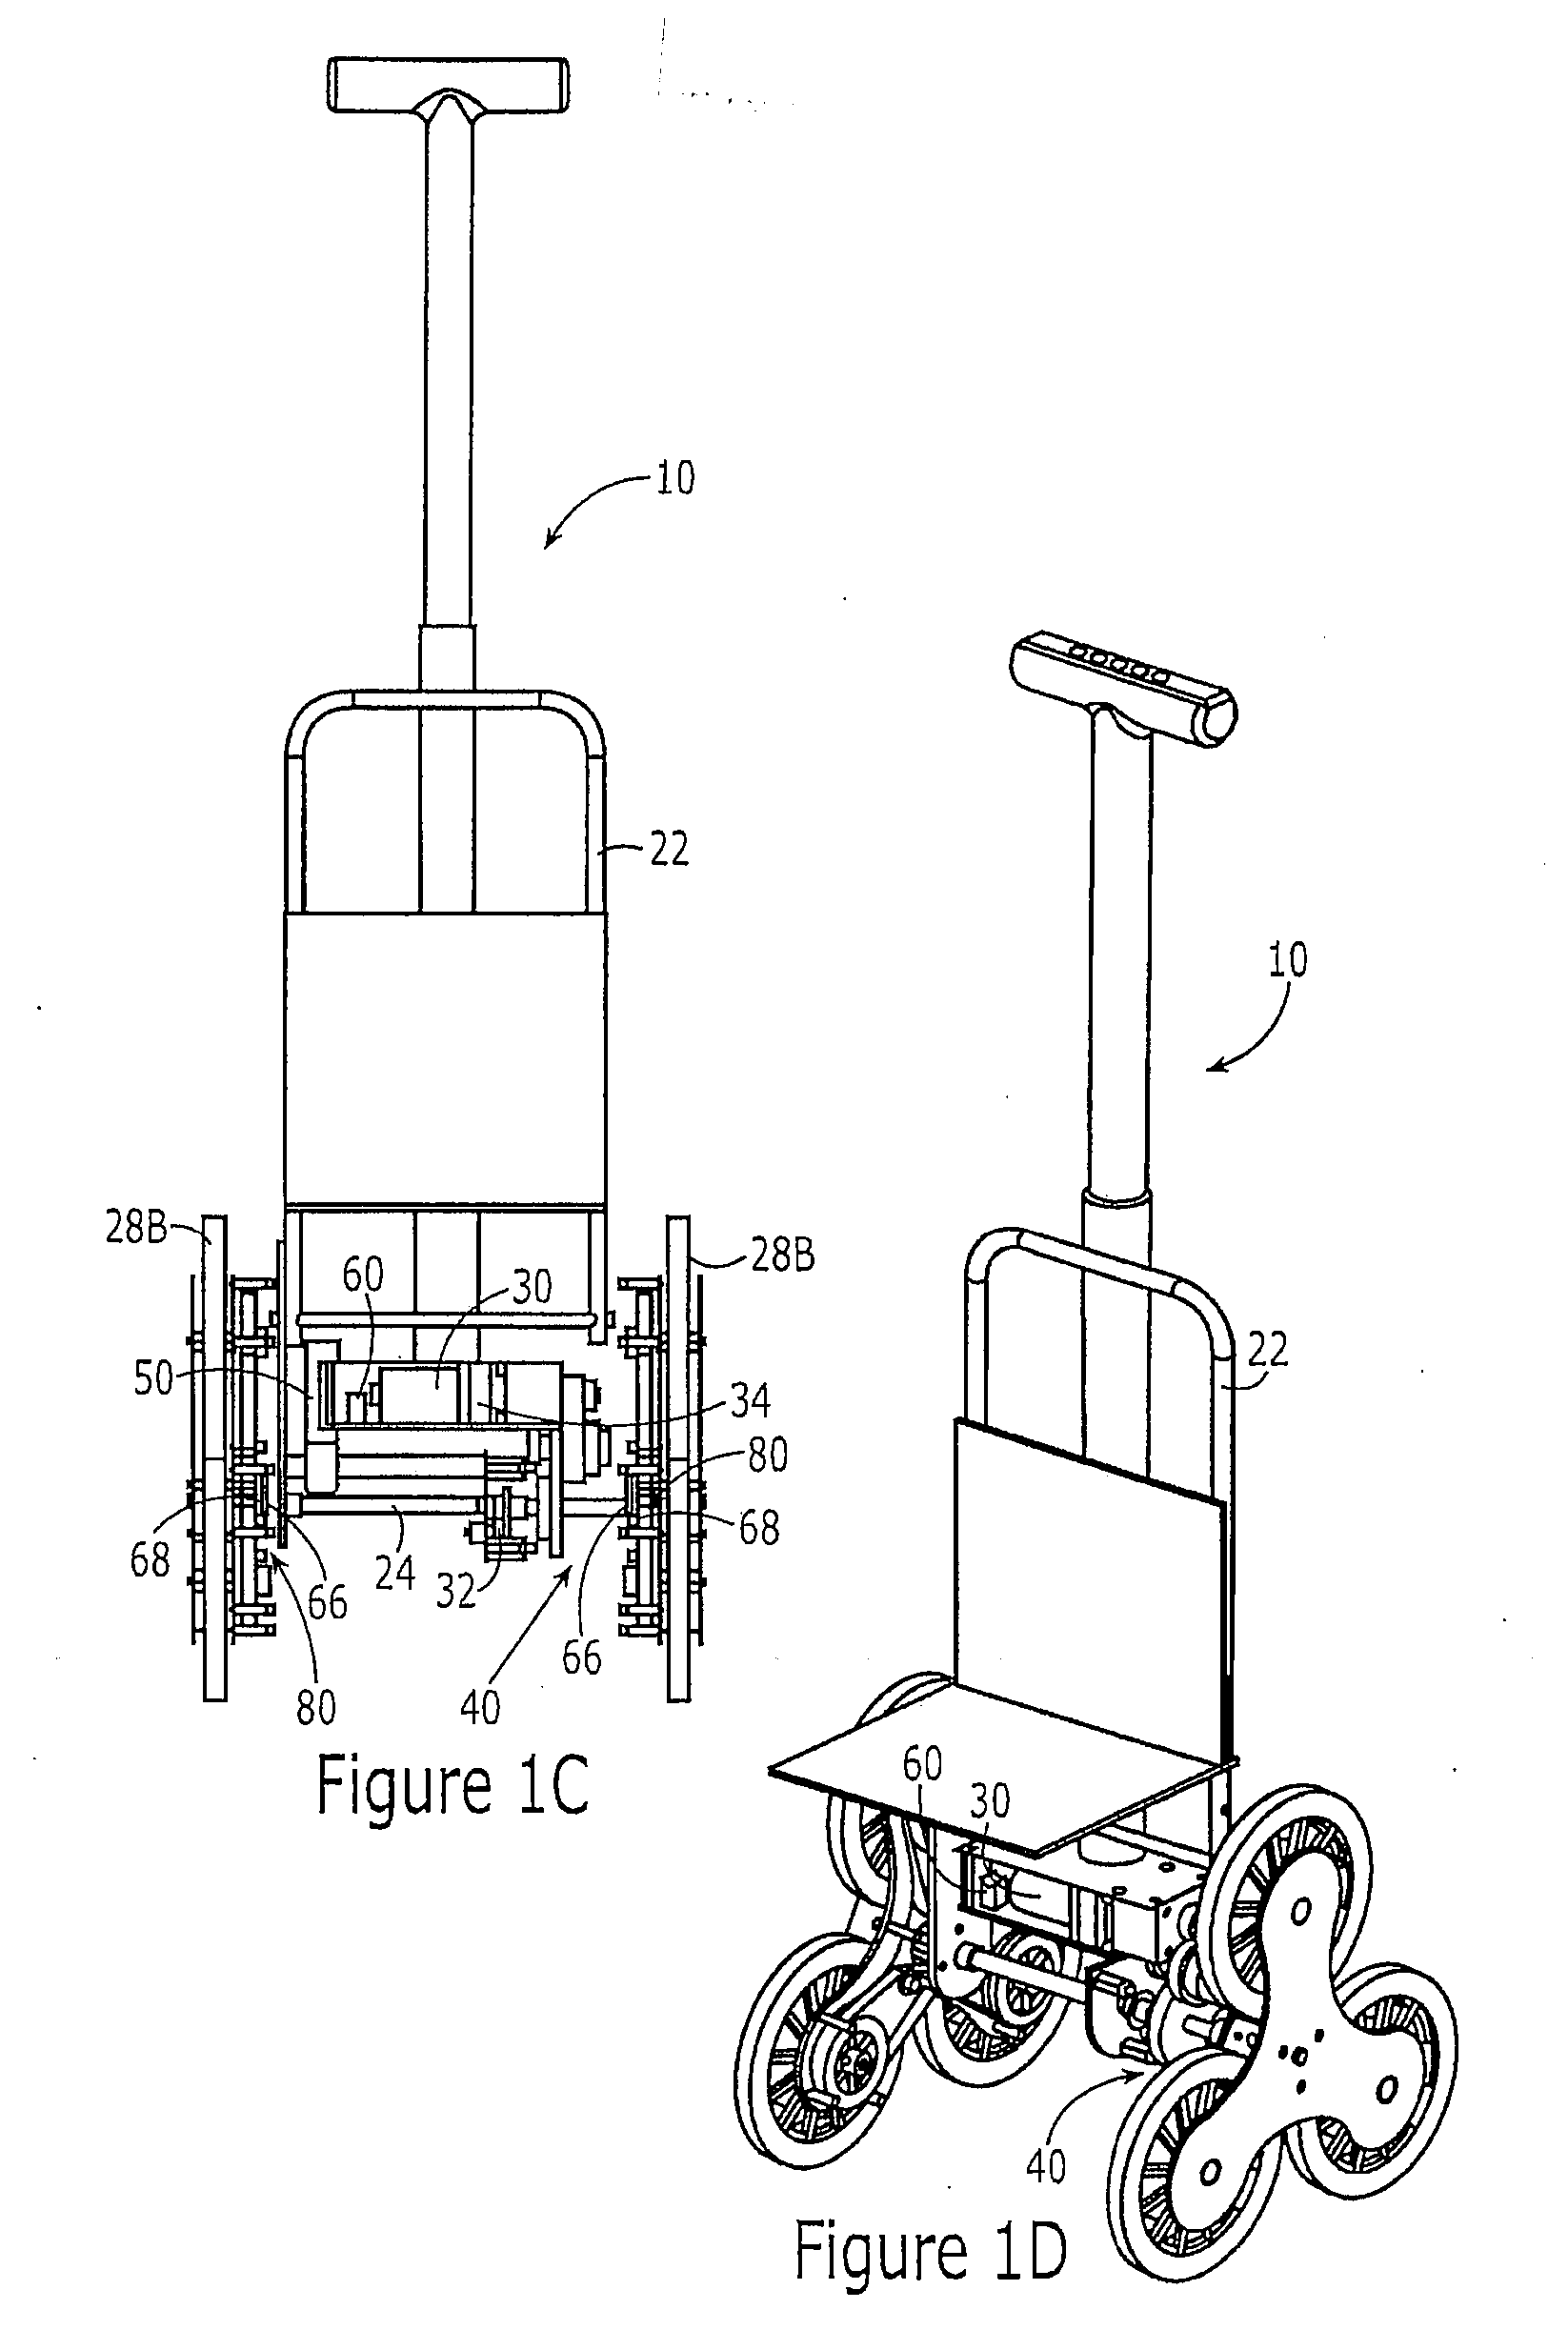 Mechanical Tri-Wheel Retention Assembly for Stair-Climbing Wheeled Vehicle